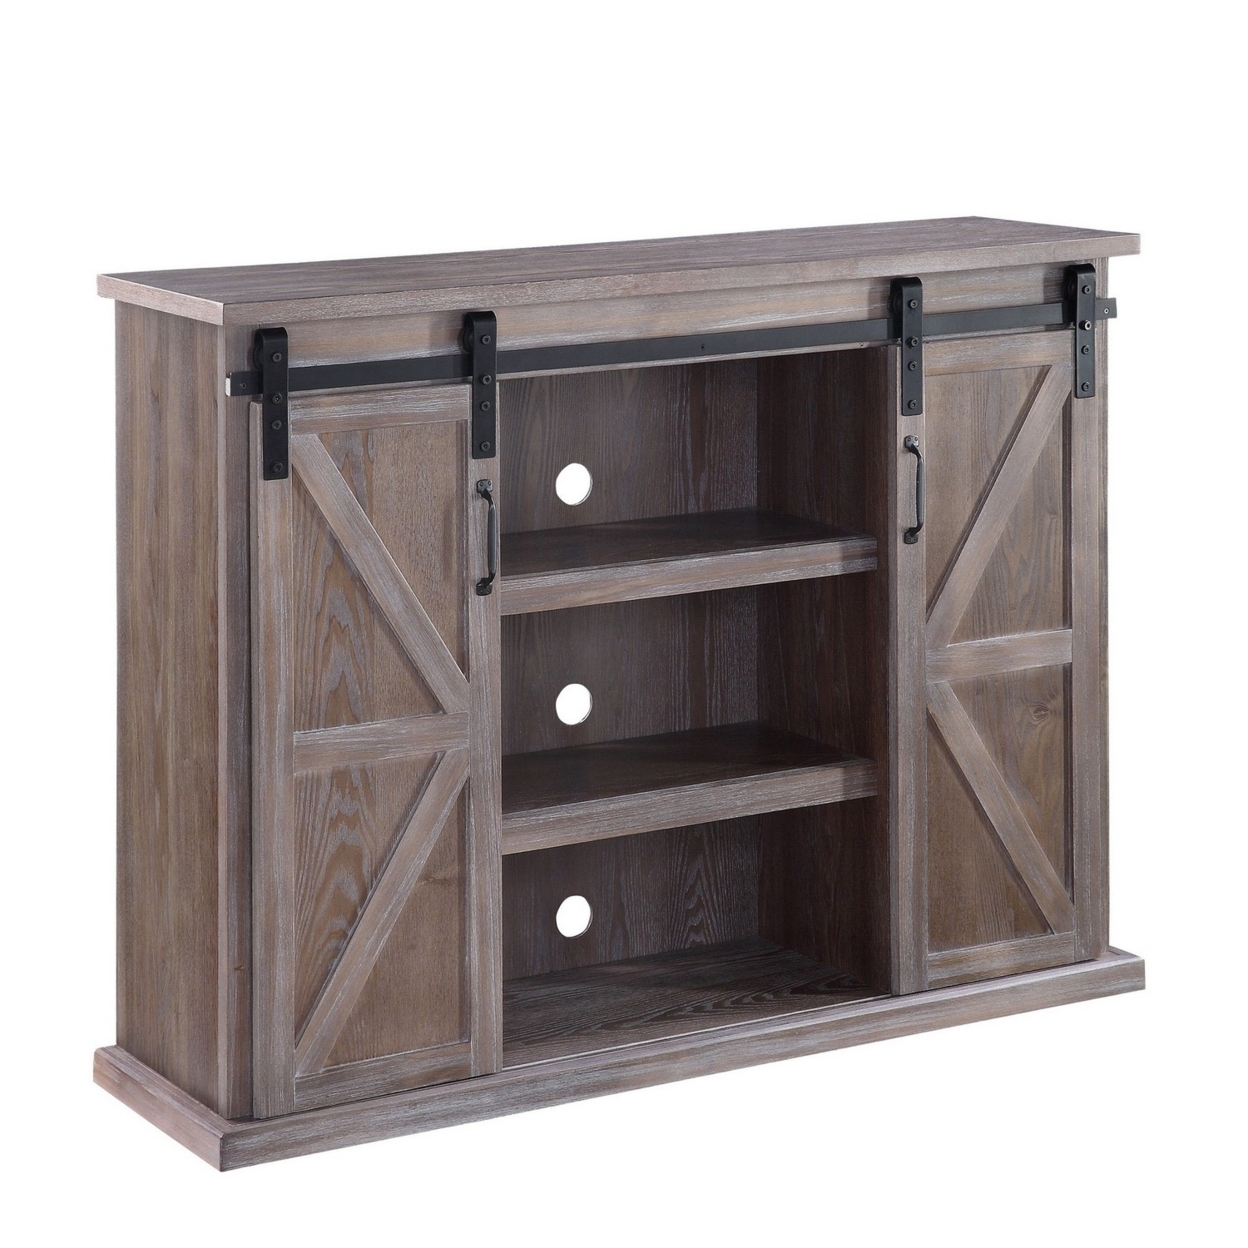 TV Stand With 2 Barn Sliding Doors And Farmhouse Style, Rustic Brown- Saltoro Sherpi